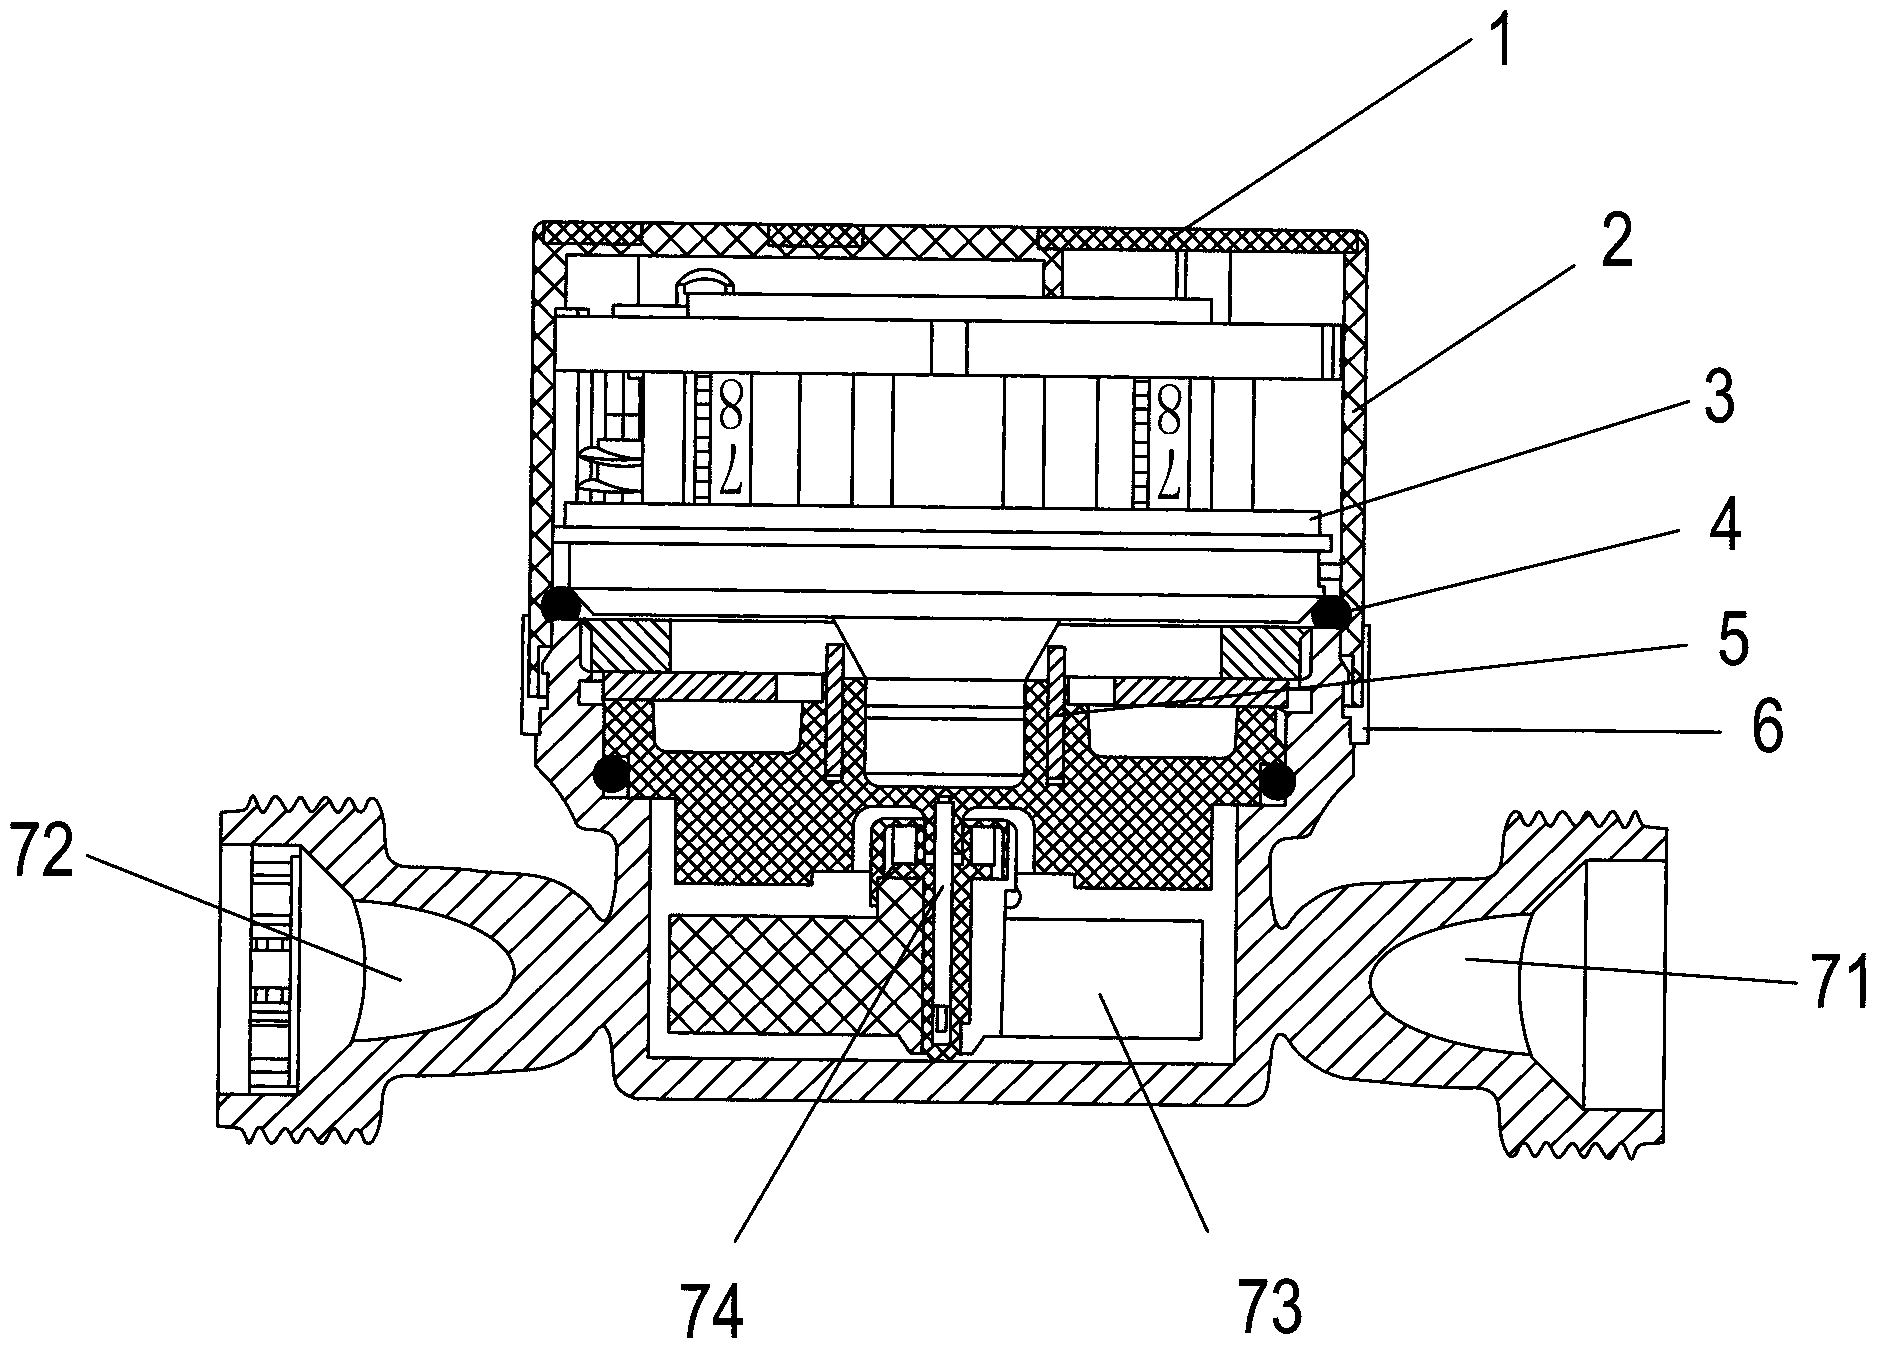 Effectiveness monitoring device for filter element of water purifier